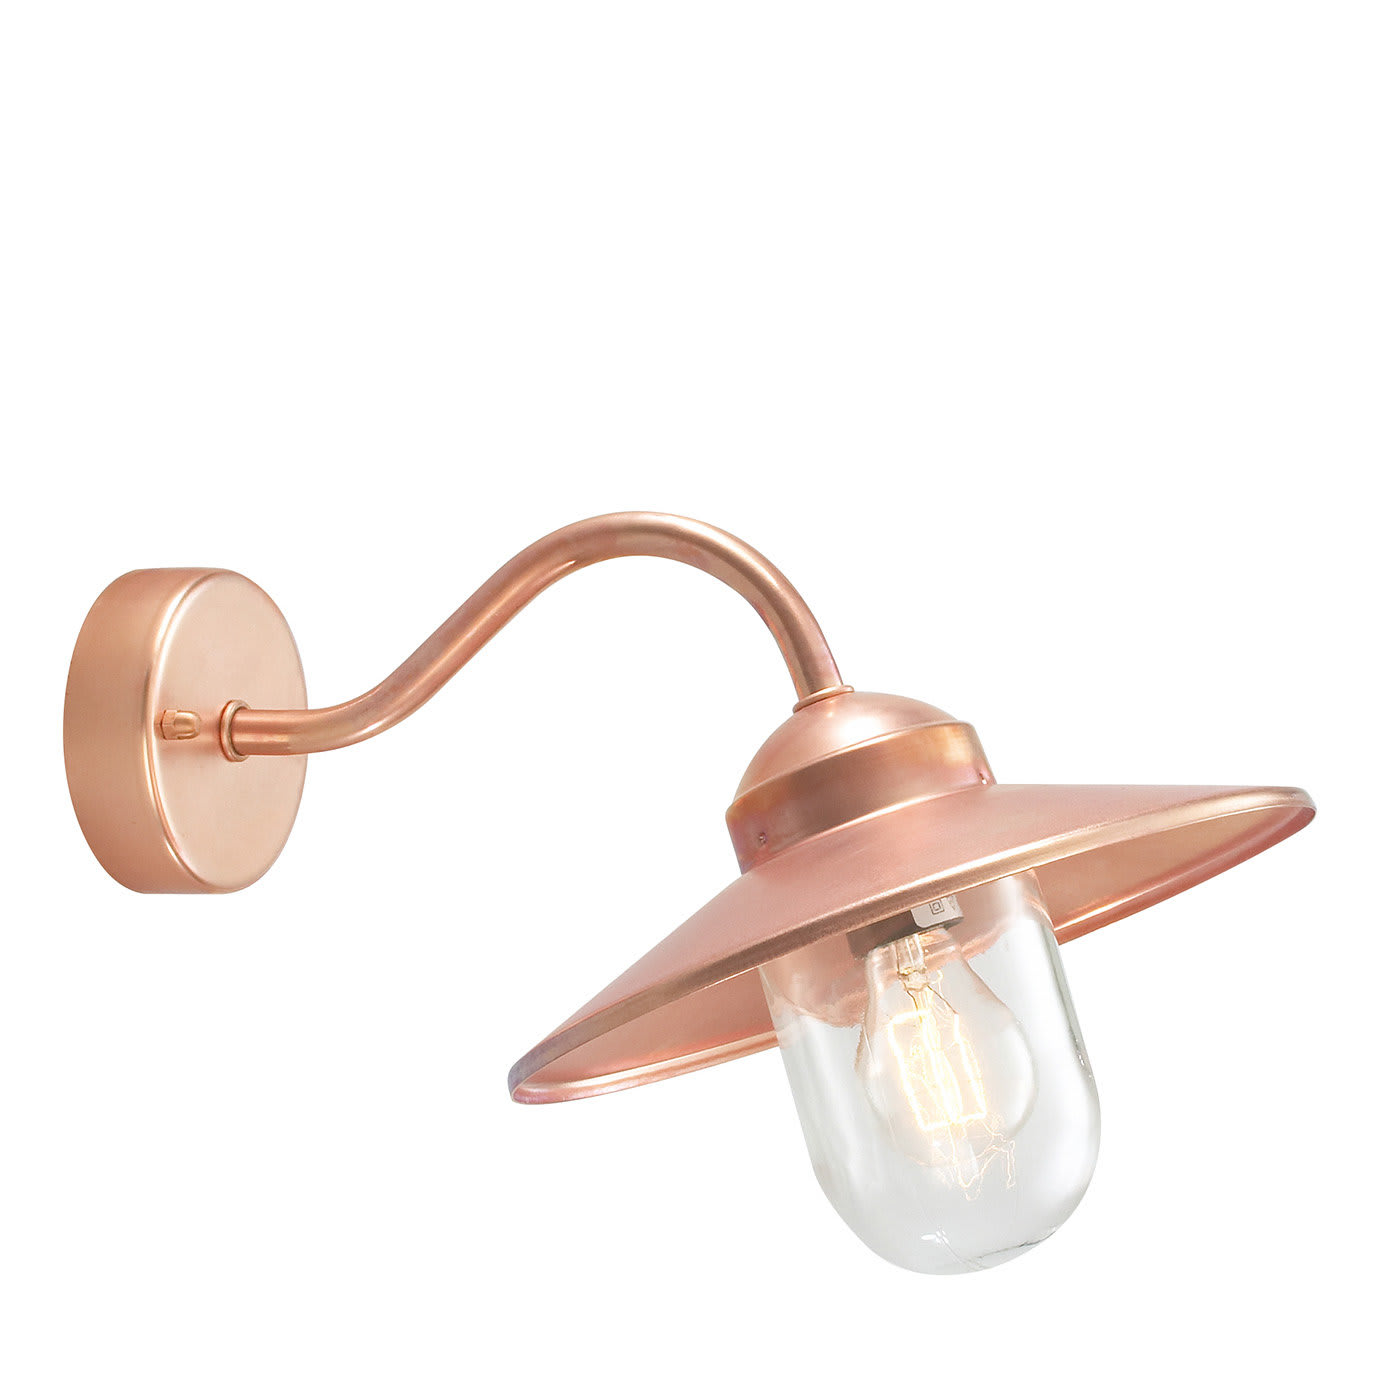 Karlstad Copper Wall Lamp - Norlys